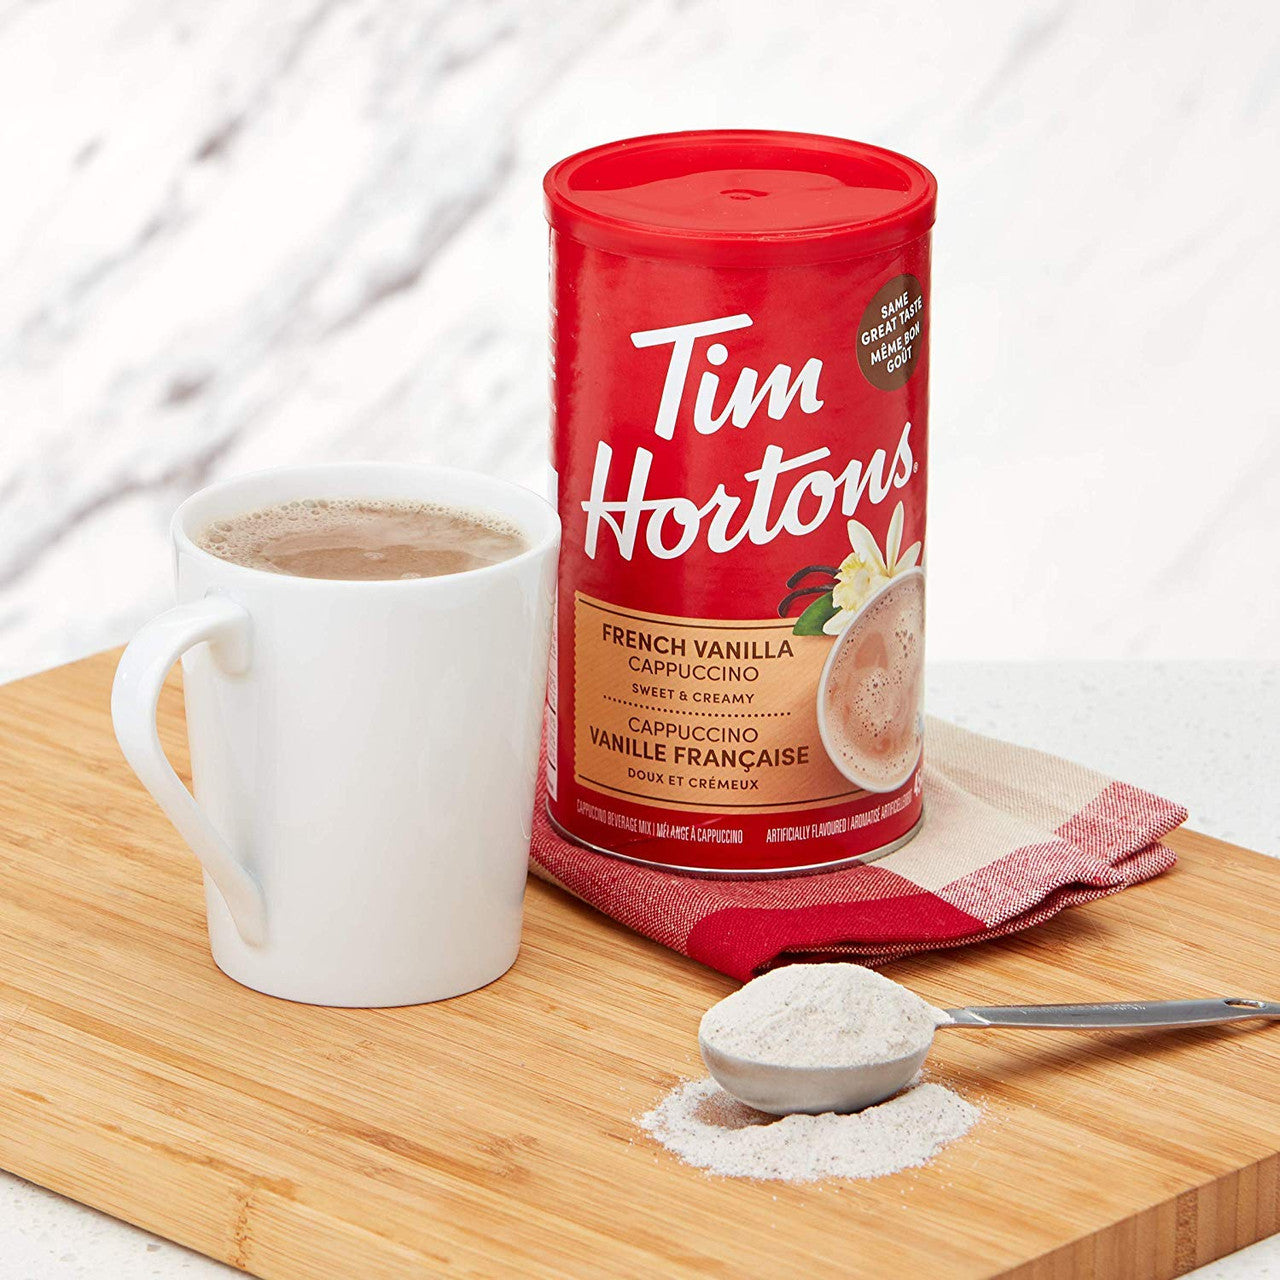 Tim Horton's Hot Chocolate and Cappuccino Bundle - Top Selling Flavors - Tim Horton's Hot Chocolate and Tim Horton's French Vanilla Cappuccino - (Timmie's Bundle)